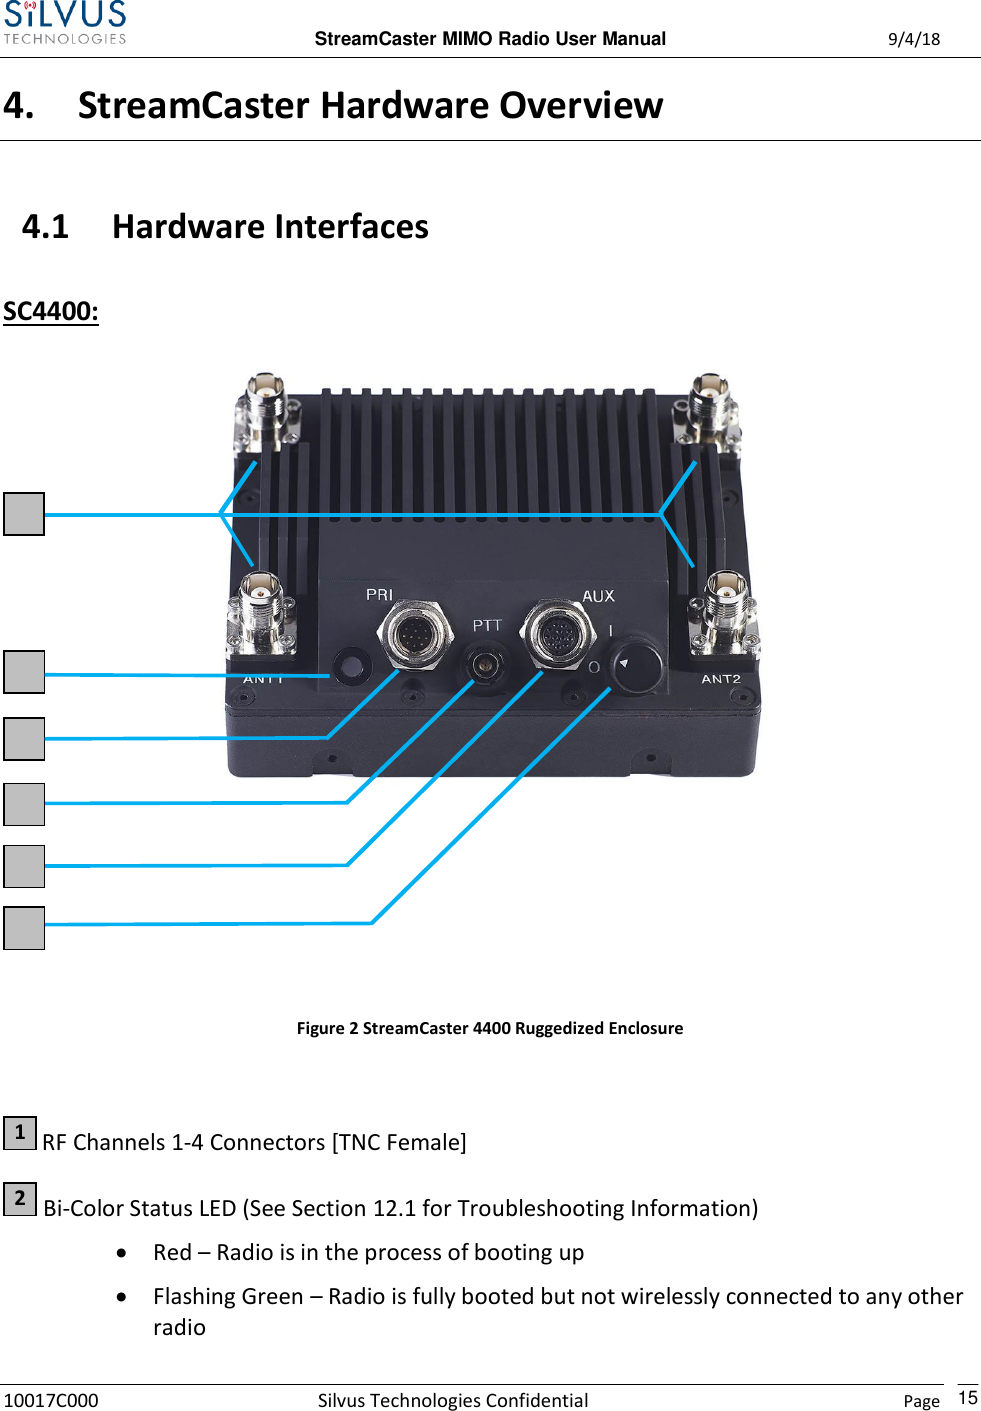  StreamCaster MIMO Radio User Manual  9/4/18 10017C000 Silvus Technologies Confidential    Page    15 4. StreamCaster Hardware Overview 4.1 Hardware Interfaces SC4400:        Figure 2 StreamCaster 4400 Ruggedized Enclosure   RF Channels 1-4 Connectors [TNC Female]  Bi-Color Status LED (See Section 12.1 for Troubleshooting Information)  Red – Radio is in the process of booting up  Flashing Green – Radio is fully booted but not wirelessly connected to any other radio 2 1 